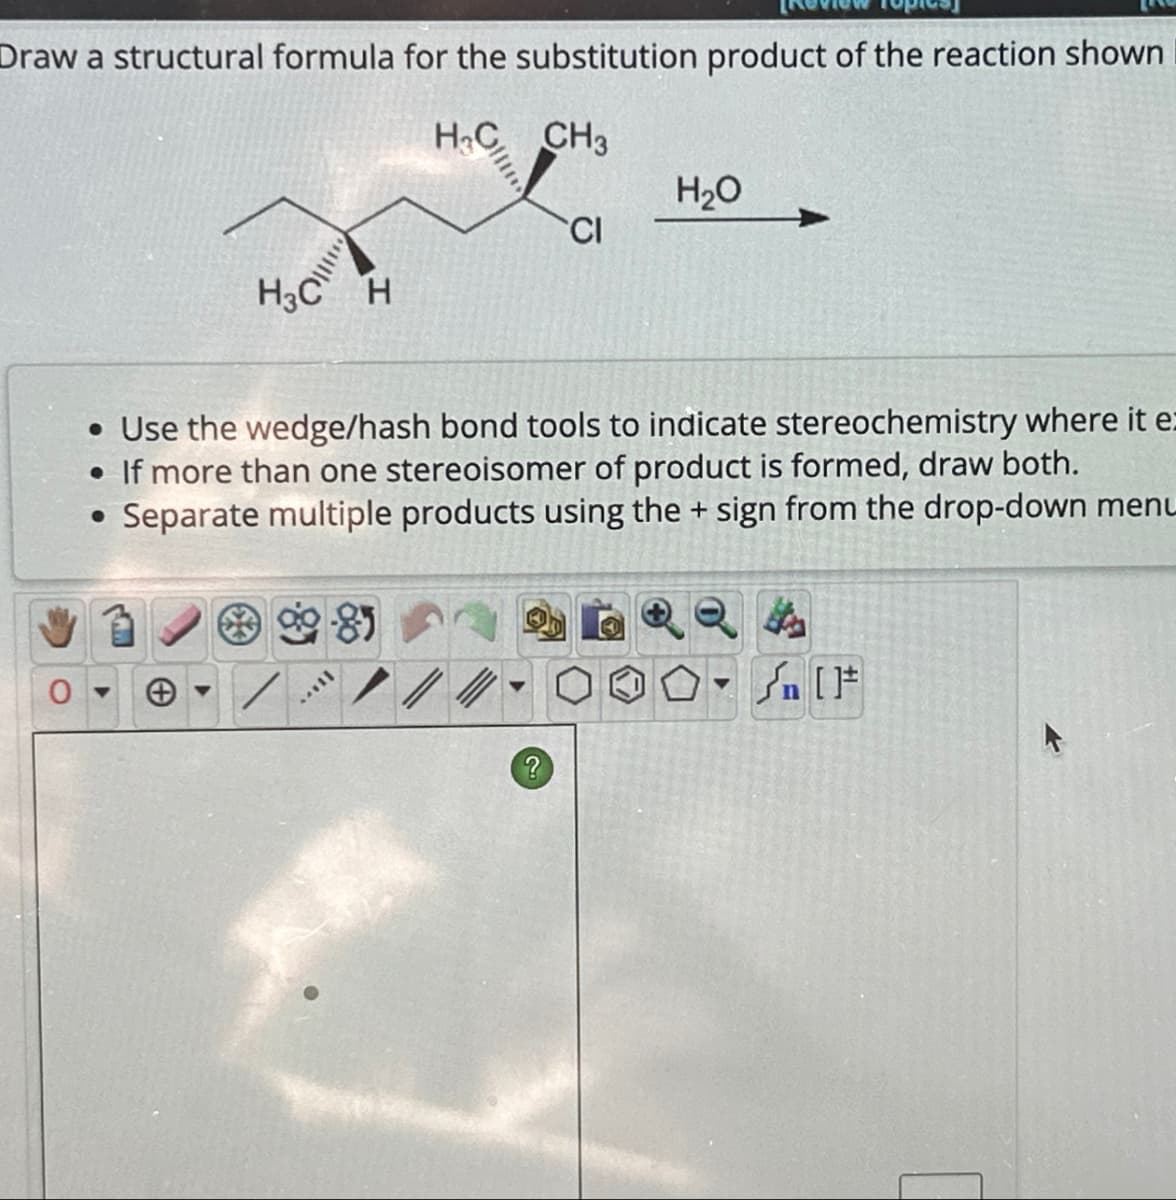 Draw a structural formula for the substitution product of the reaction shown
H&C CH3
H₂O
CI
H3C H
• Use the wedge/hash bond tools to indicate stereochemistry where it e
• If more than one stereoisomer of product is formed, draw both.
• Separate multiple products using the + sign from the drop-down menu
Θ
On [Ft
?